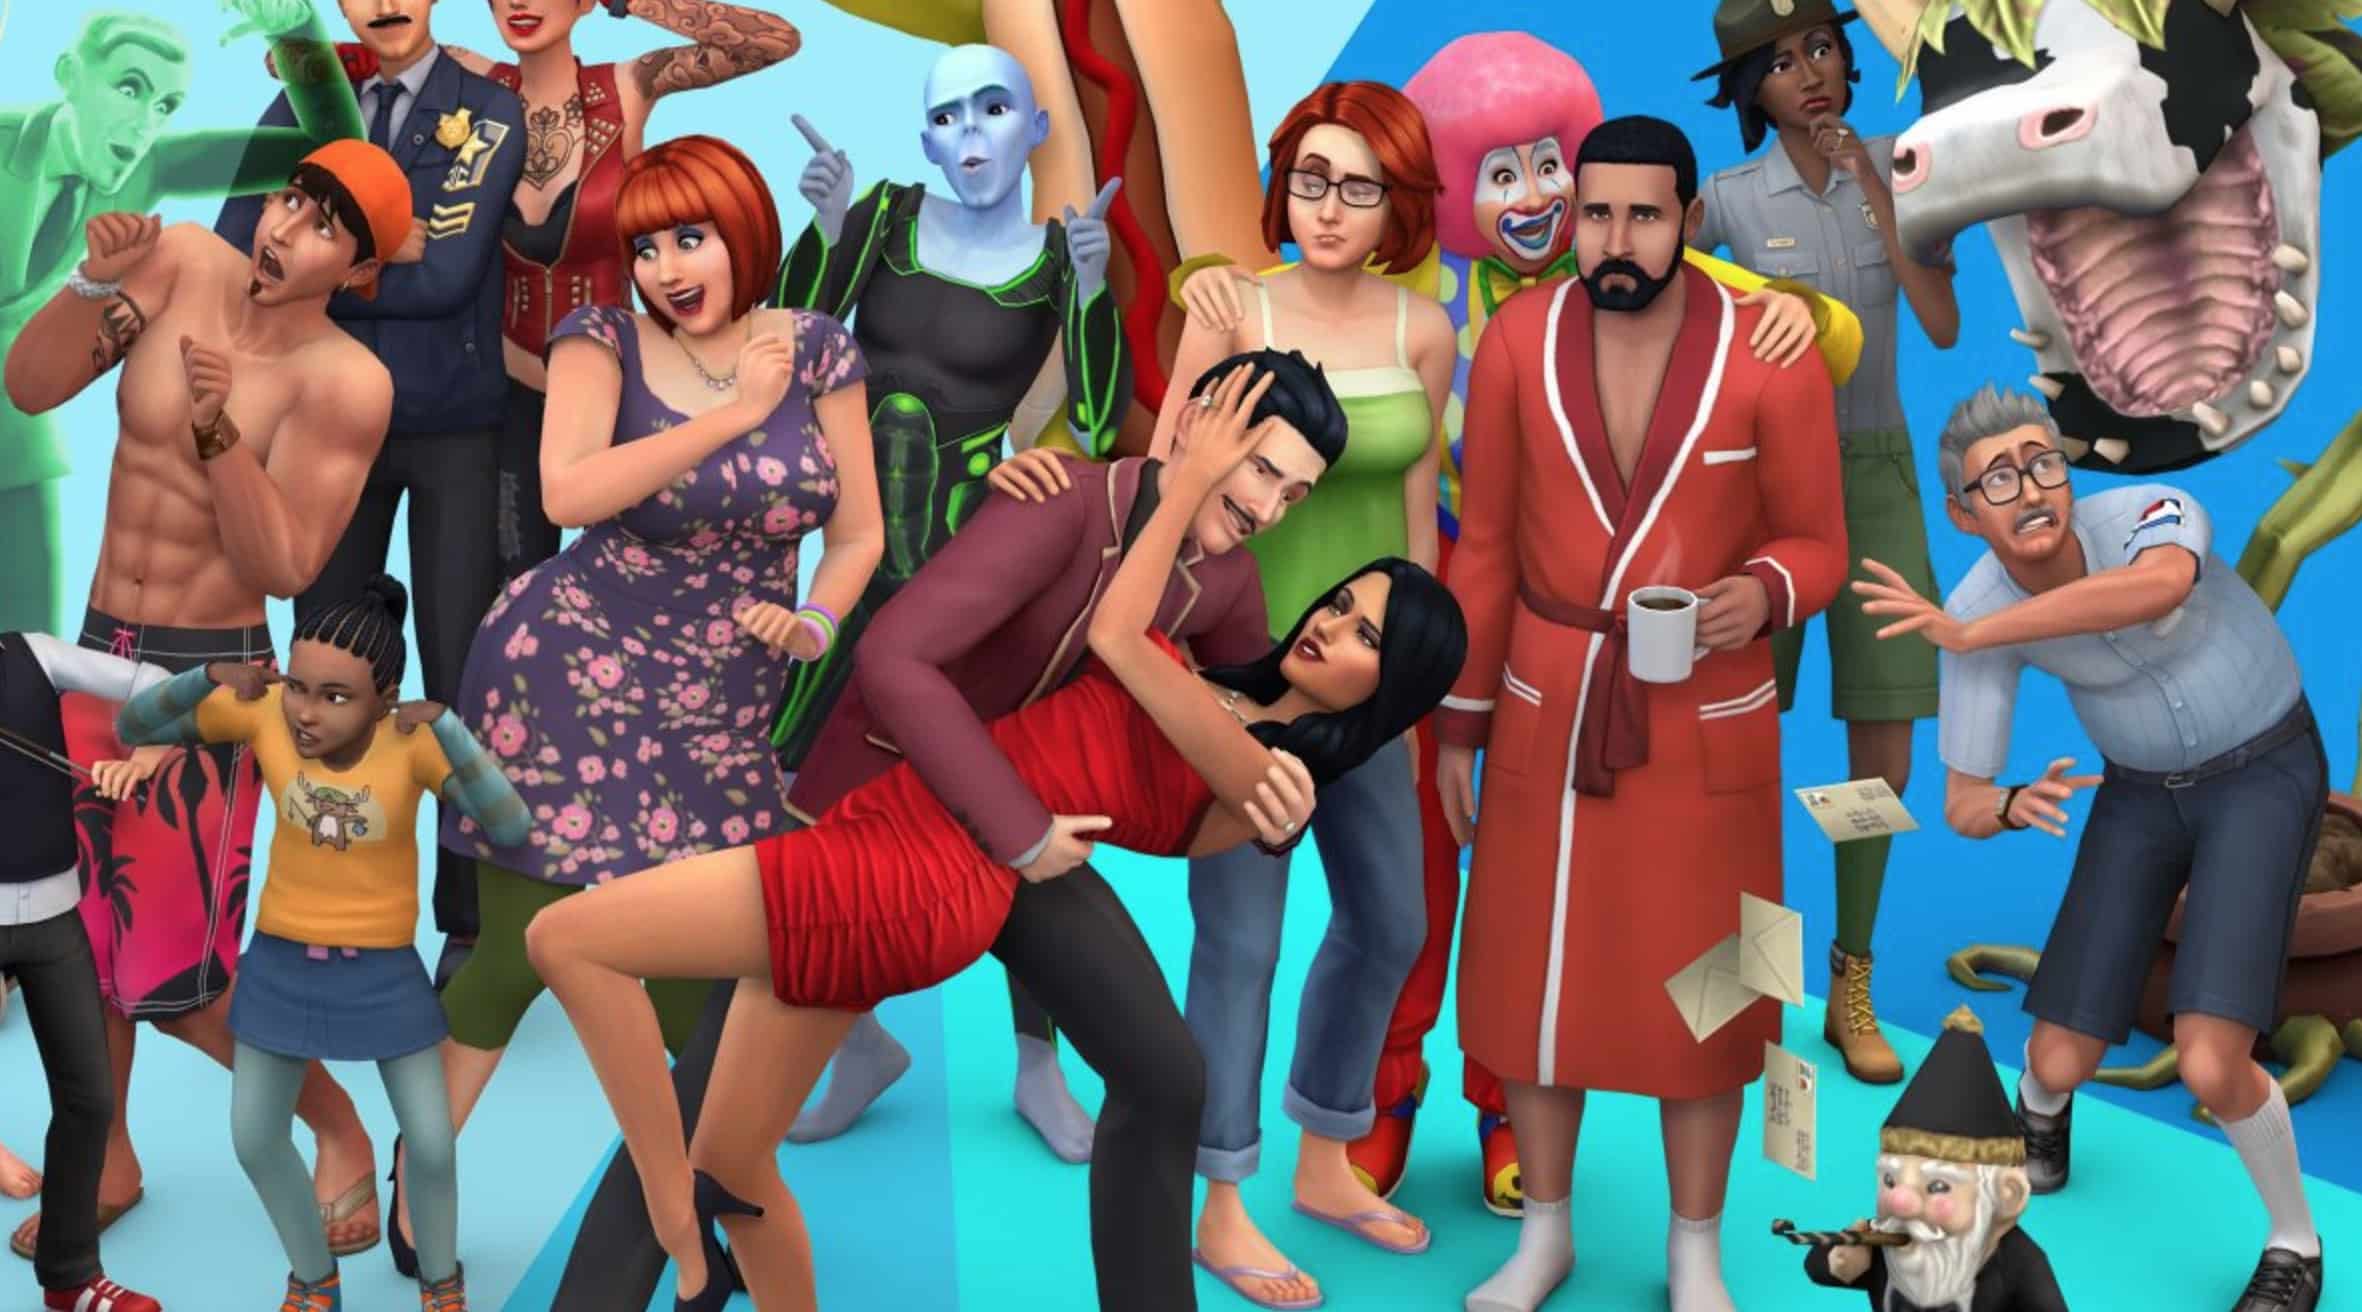 The Sims 4 for FREE! Goes Free2Play from October 18th